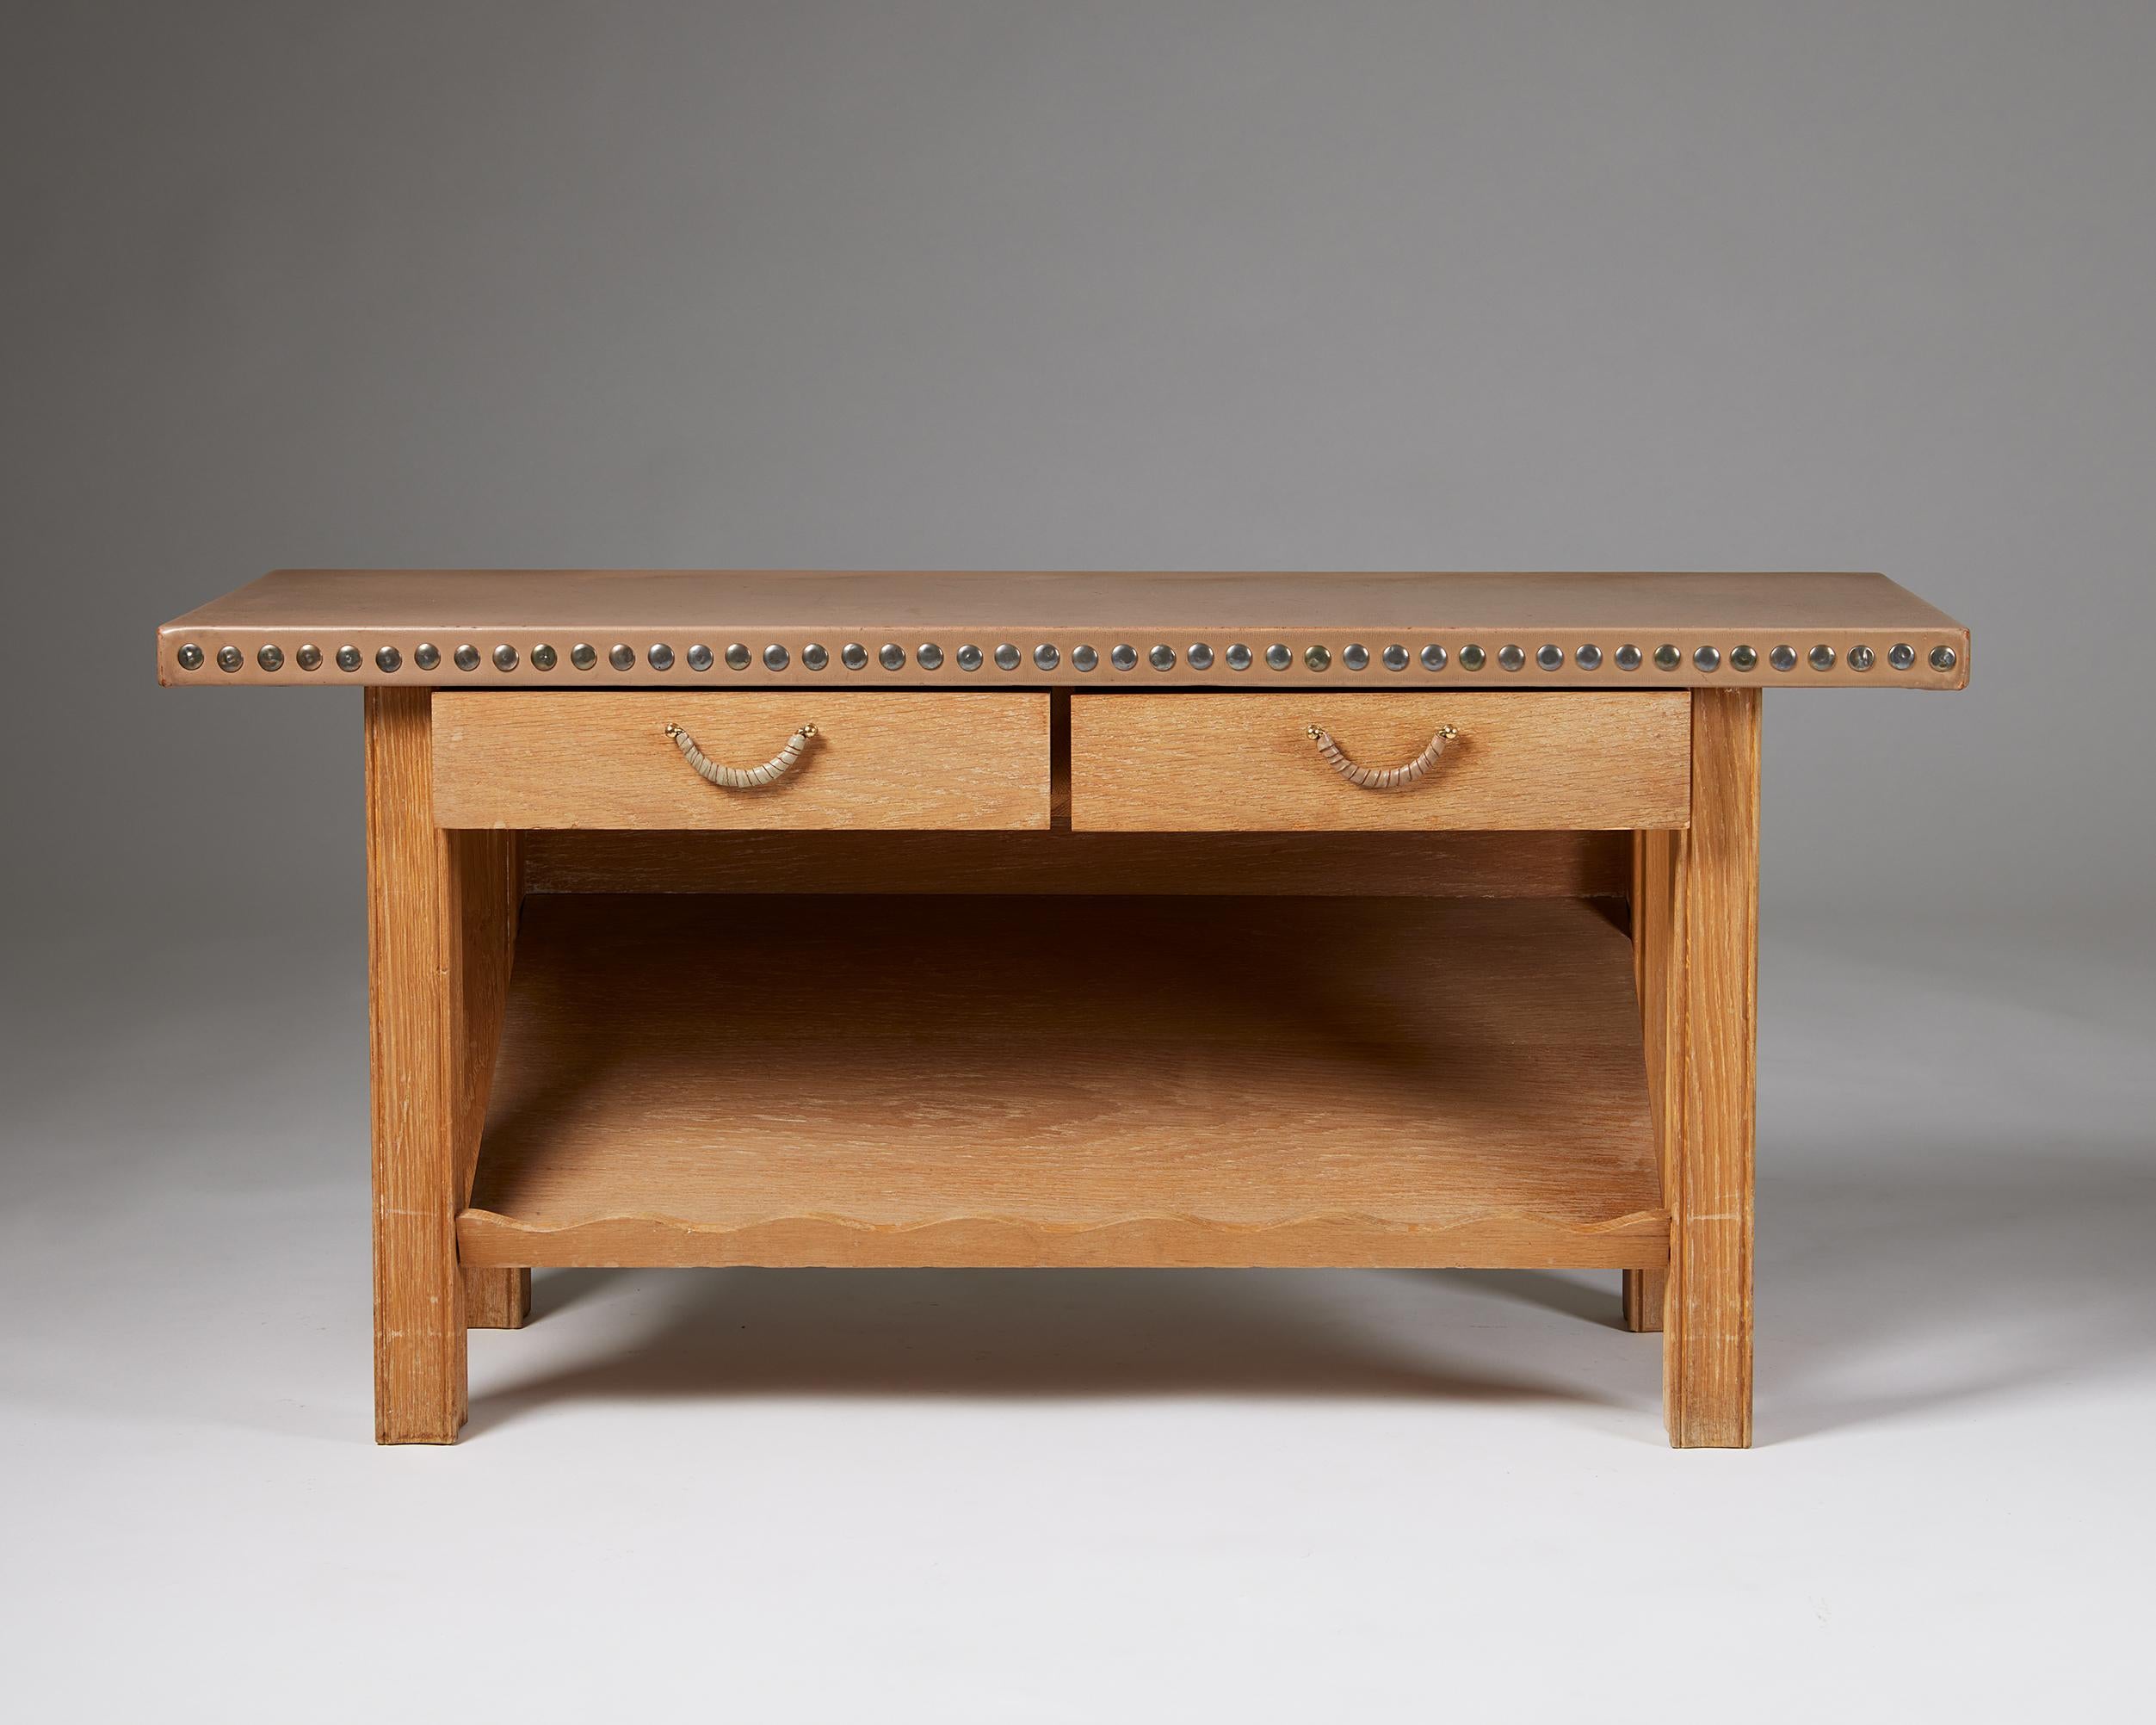 Swedish Sideboard Attributed to Axel Einar Hjorth for Nk, Sweden, 1940s For Sale